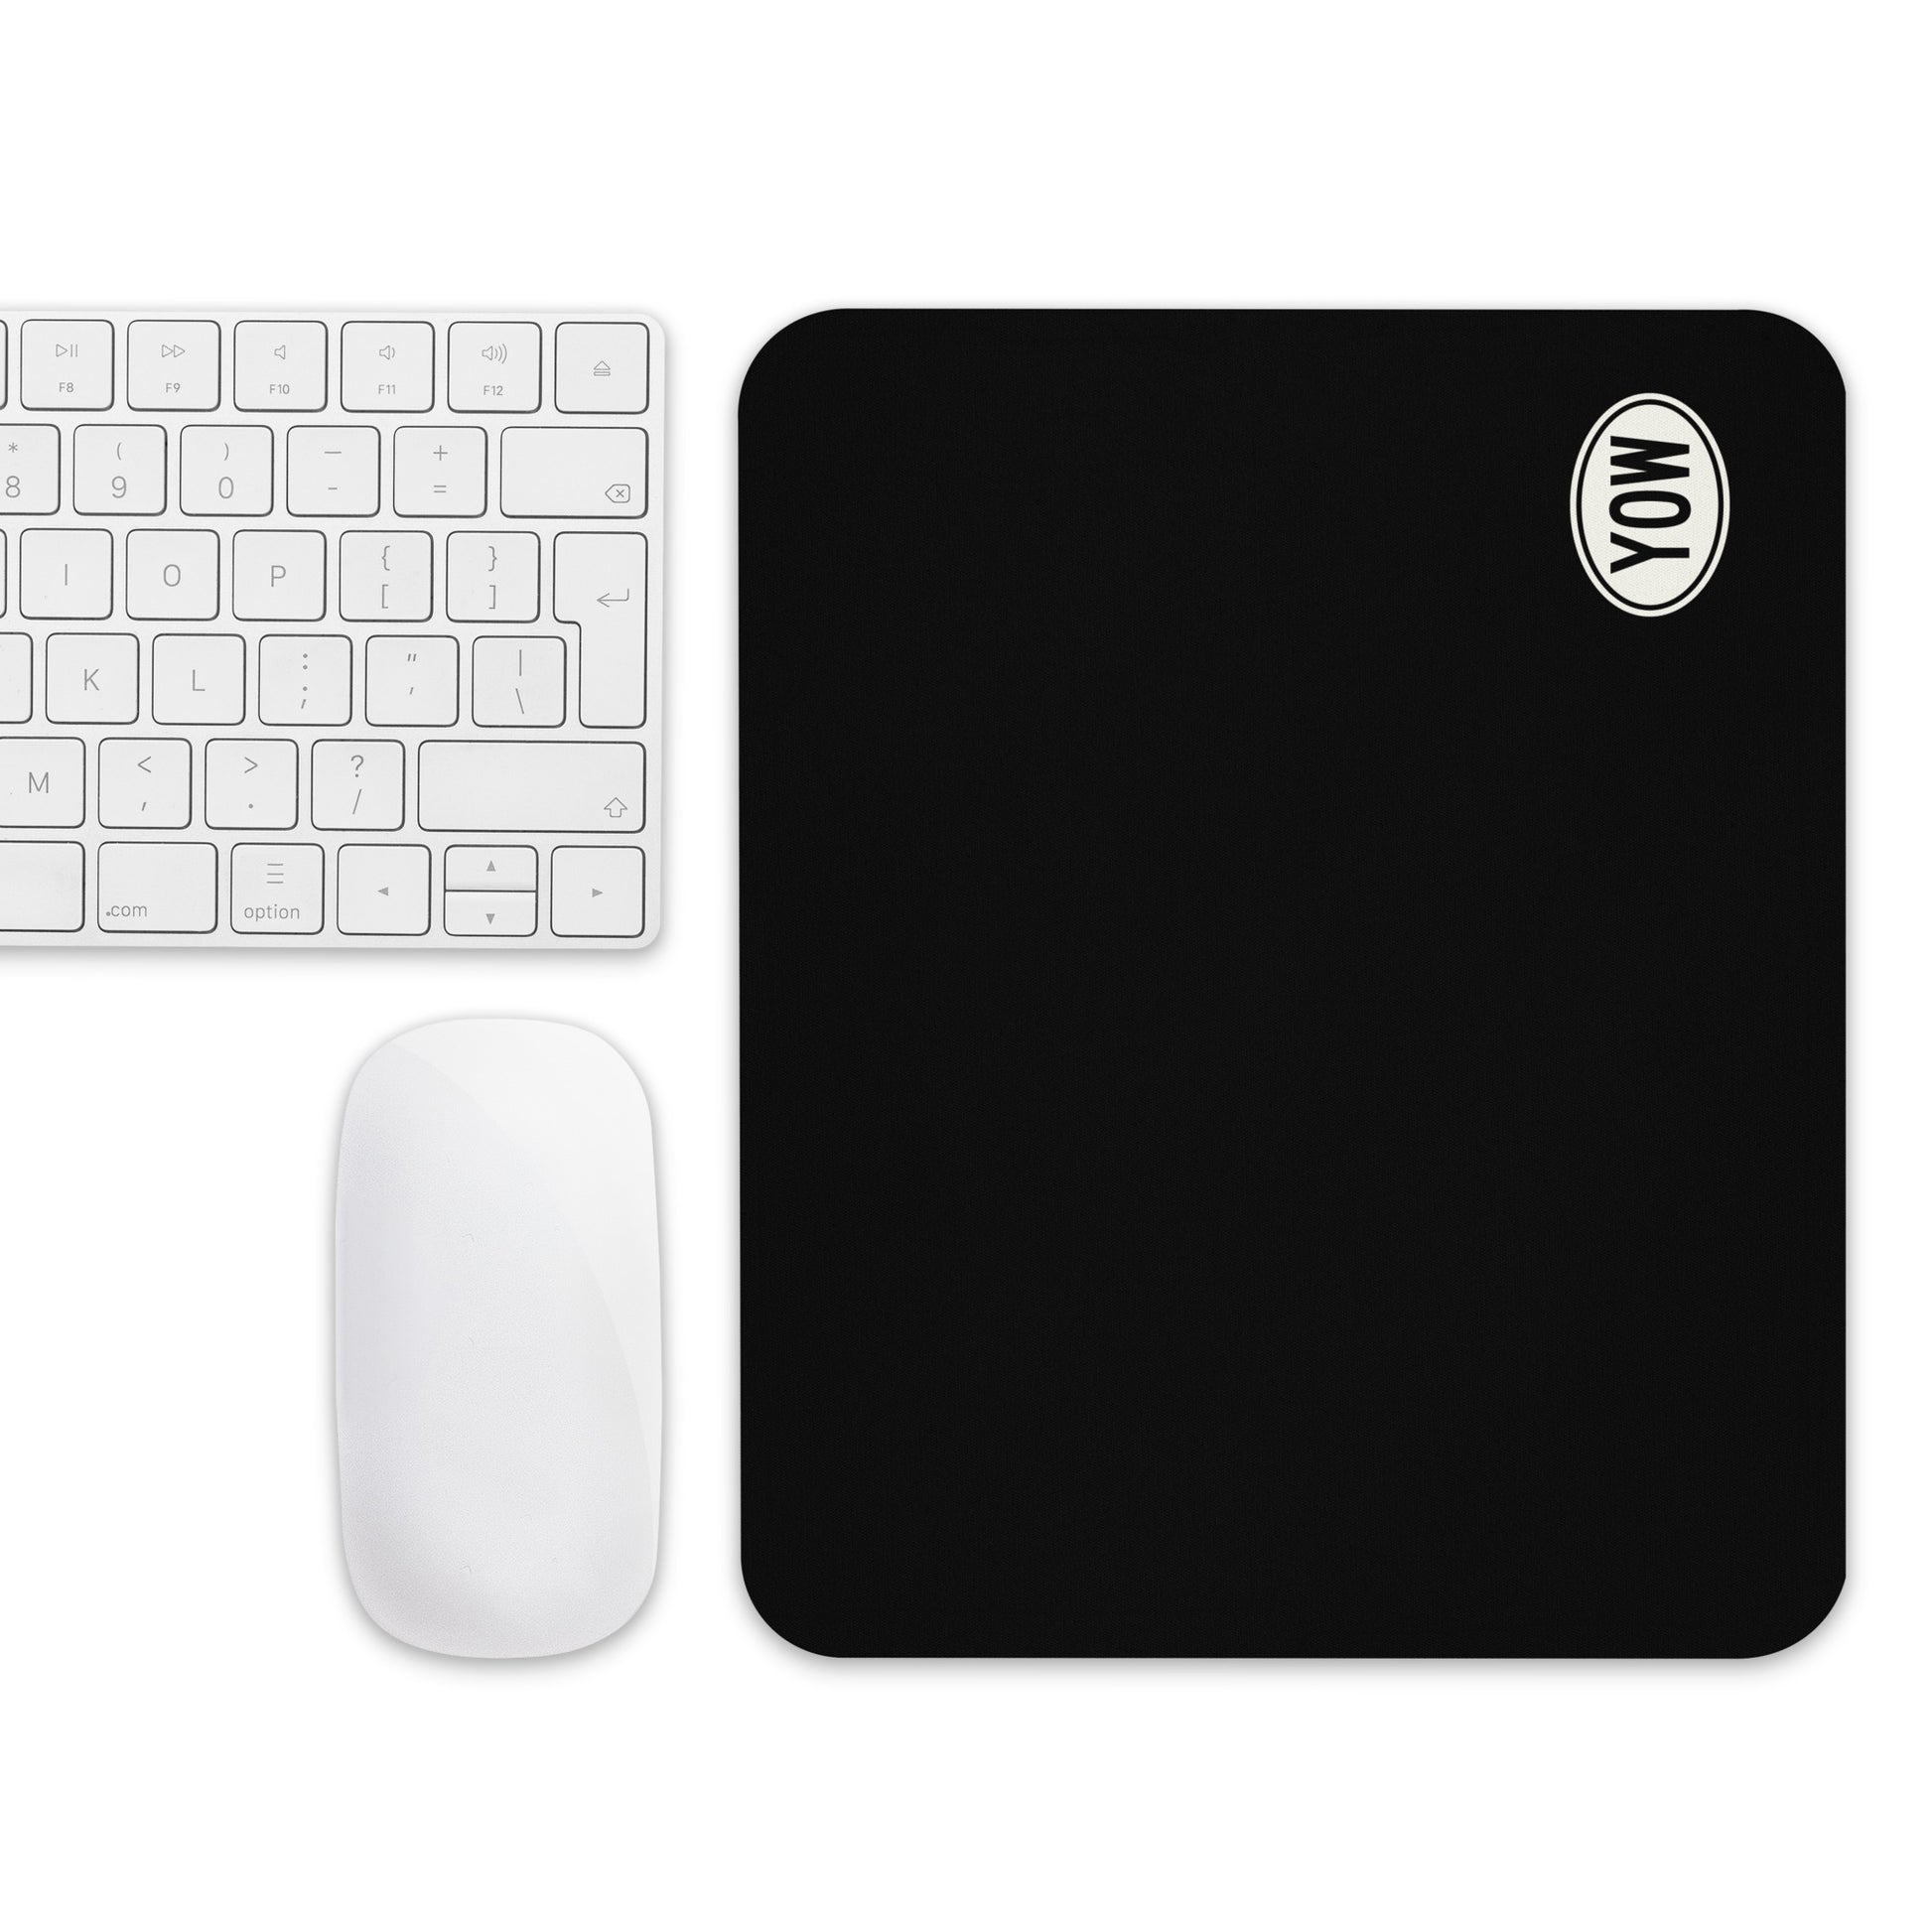 Unique Travel Gift Mouse Pad - White Oval • YOW Ottawa • YHM Designs - Image 04